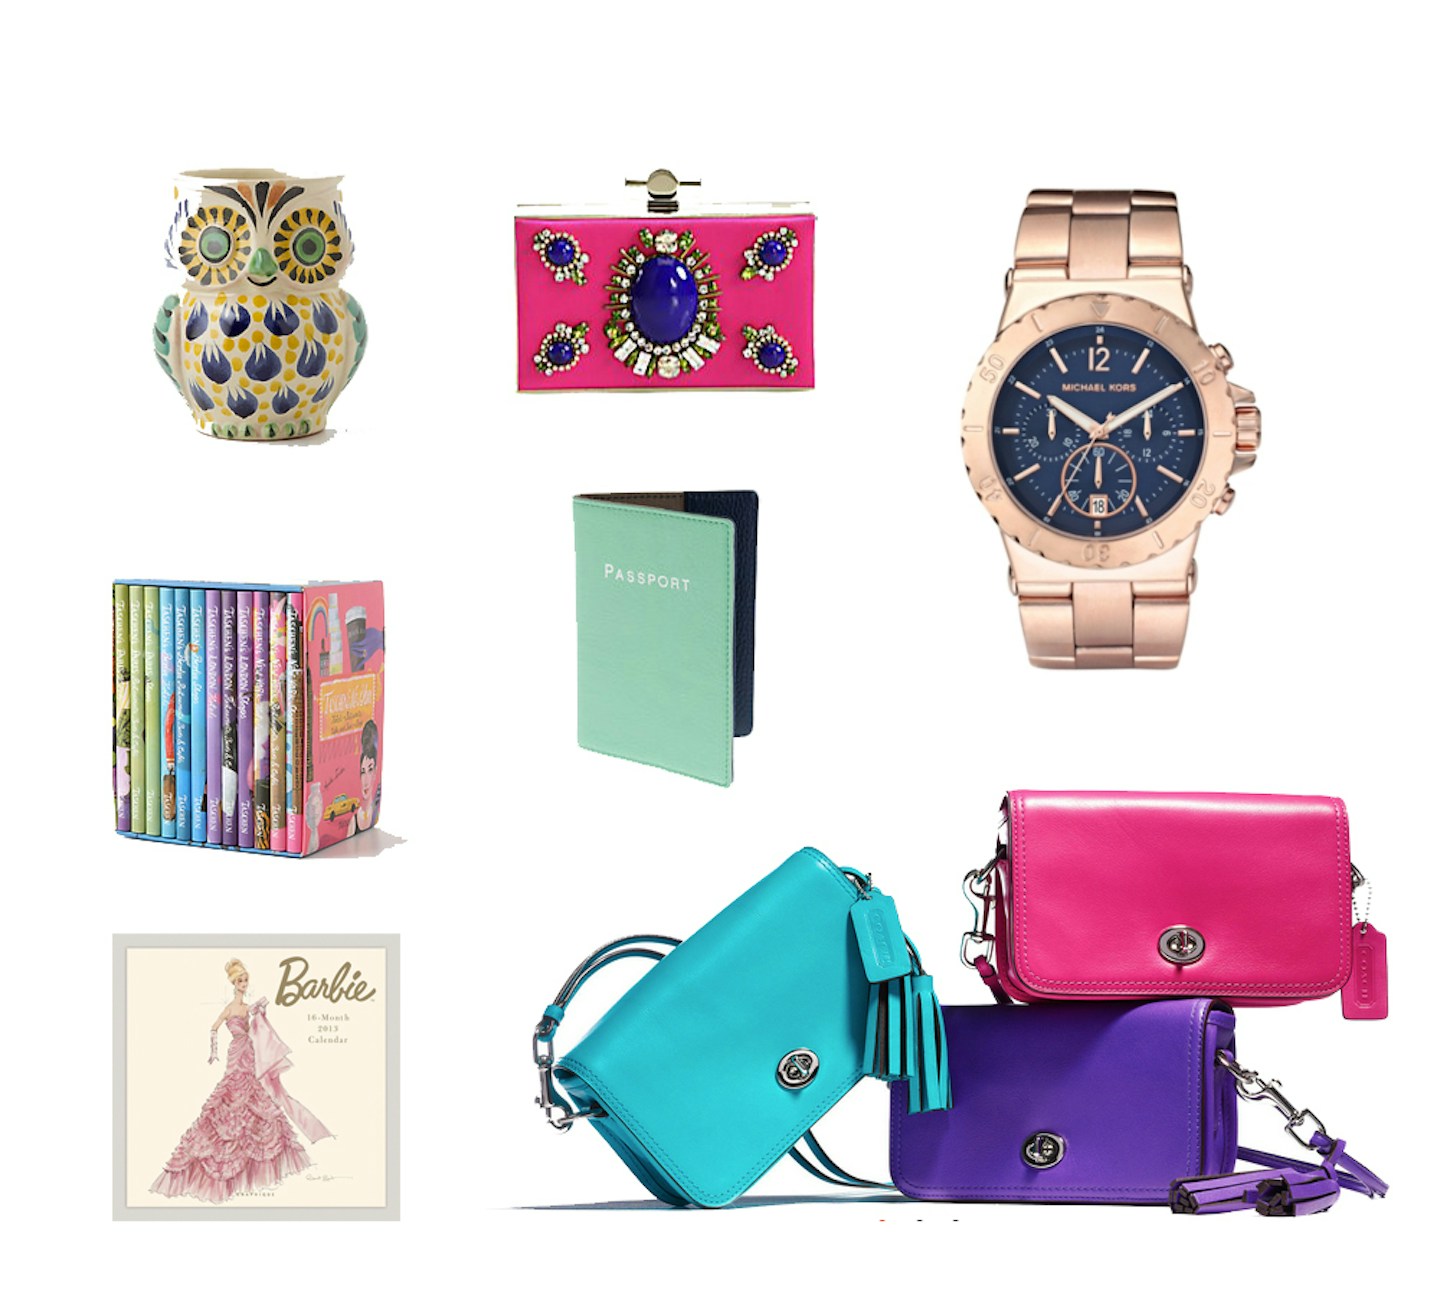 My 2012 Gift Guide – be bright and bold